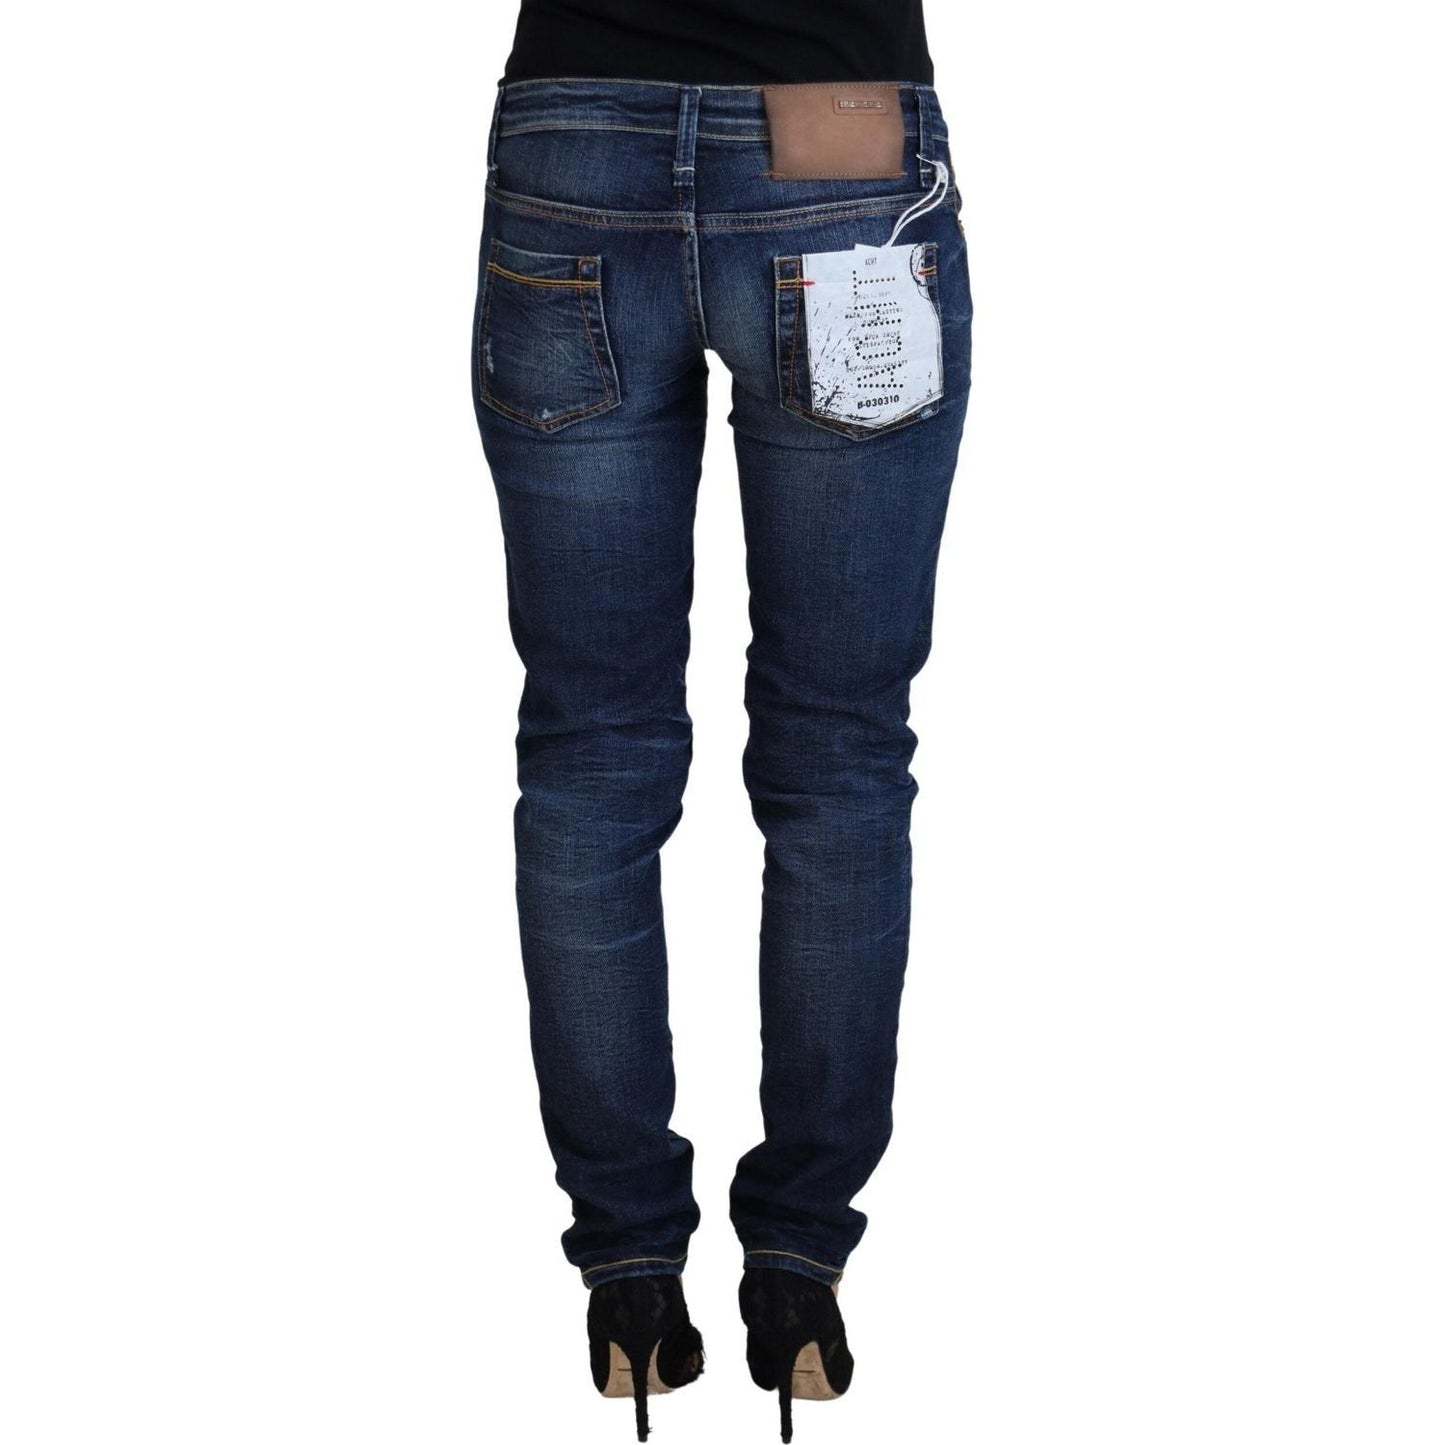 Acht Chic Low Waist Designer Skinny Jeans blue-washed-cotton-low-waist-women-casual-jeans-1